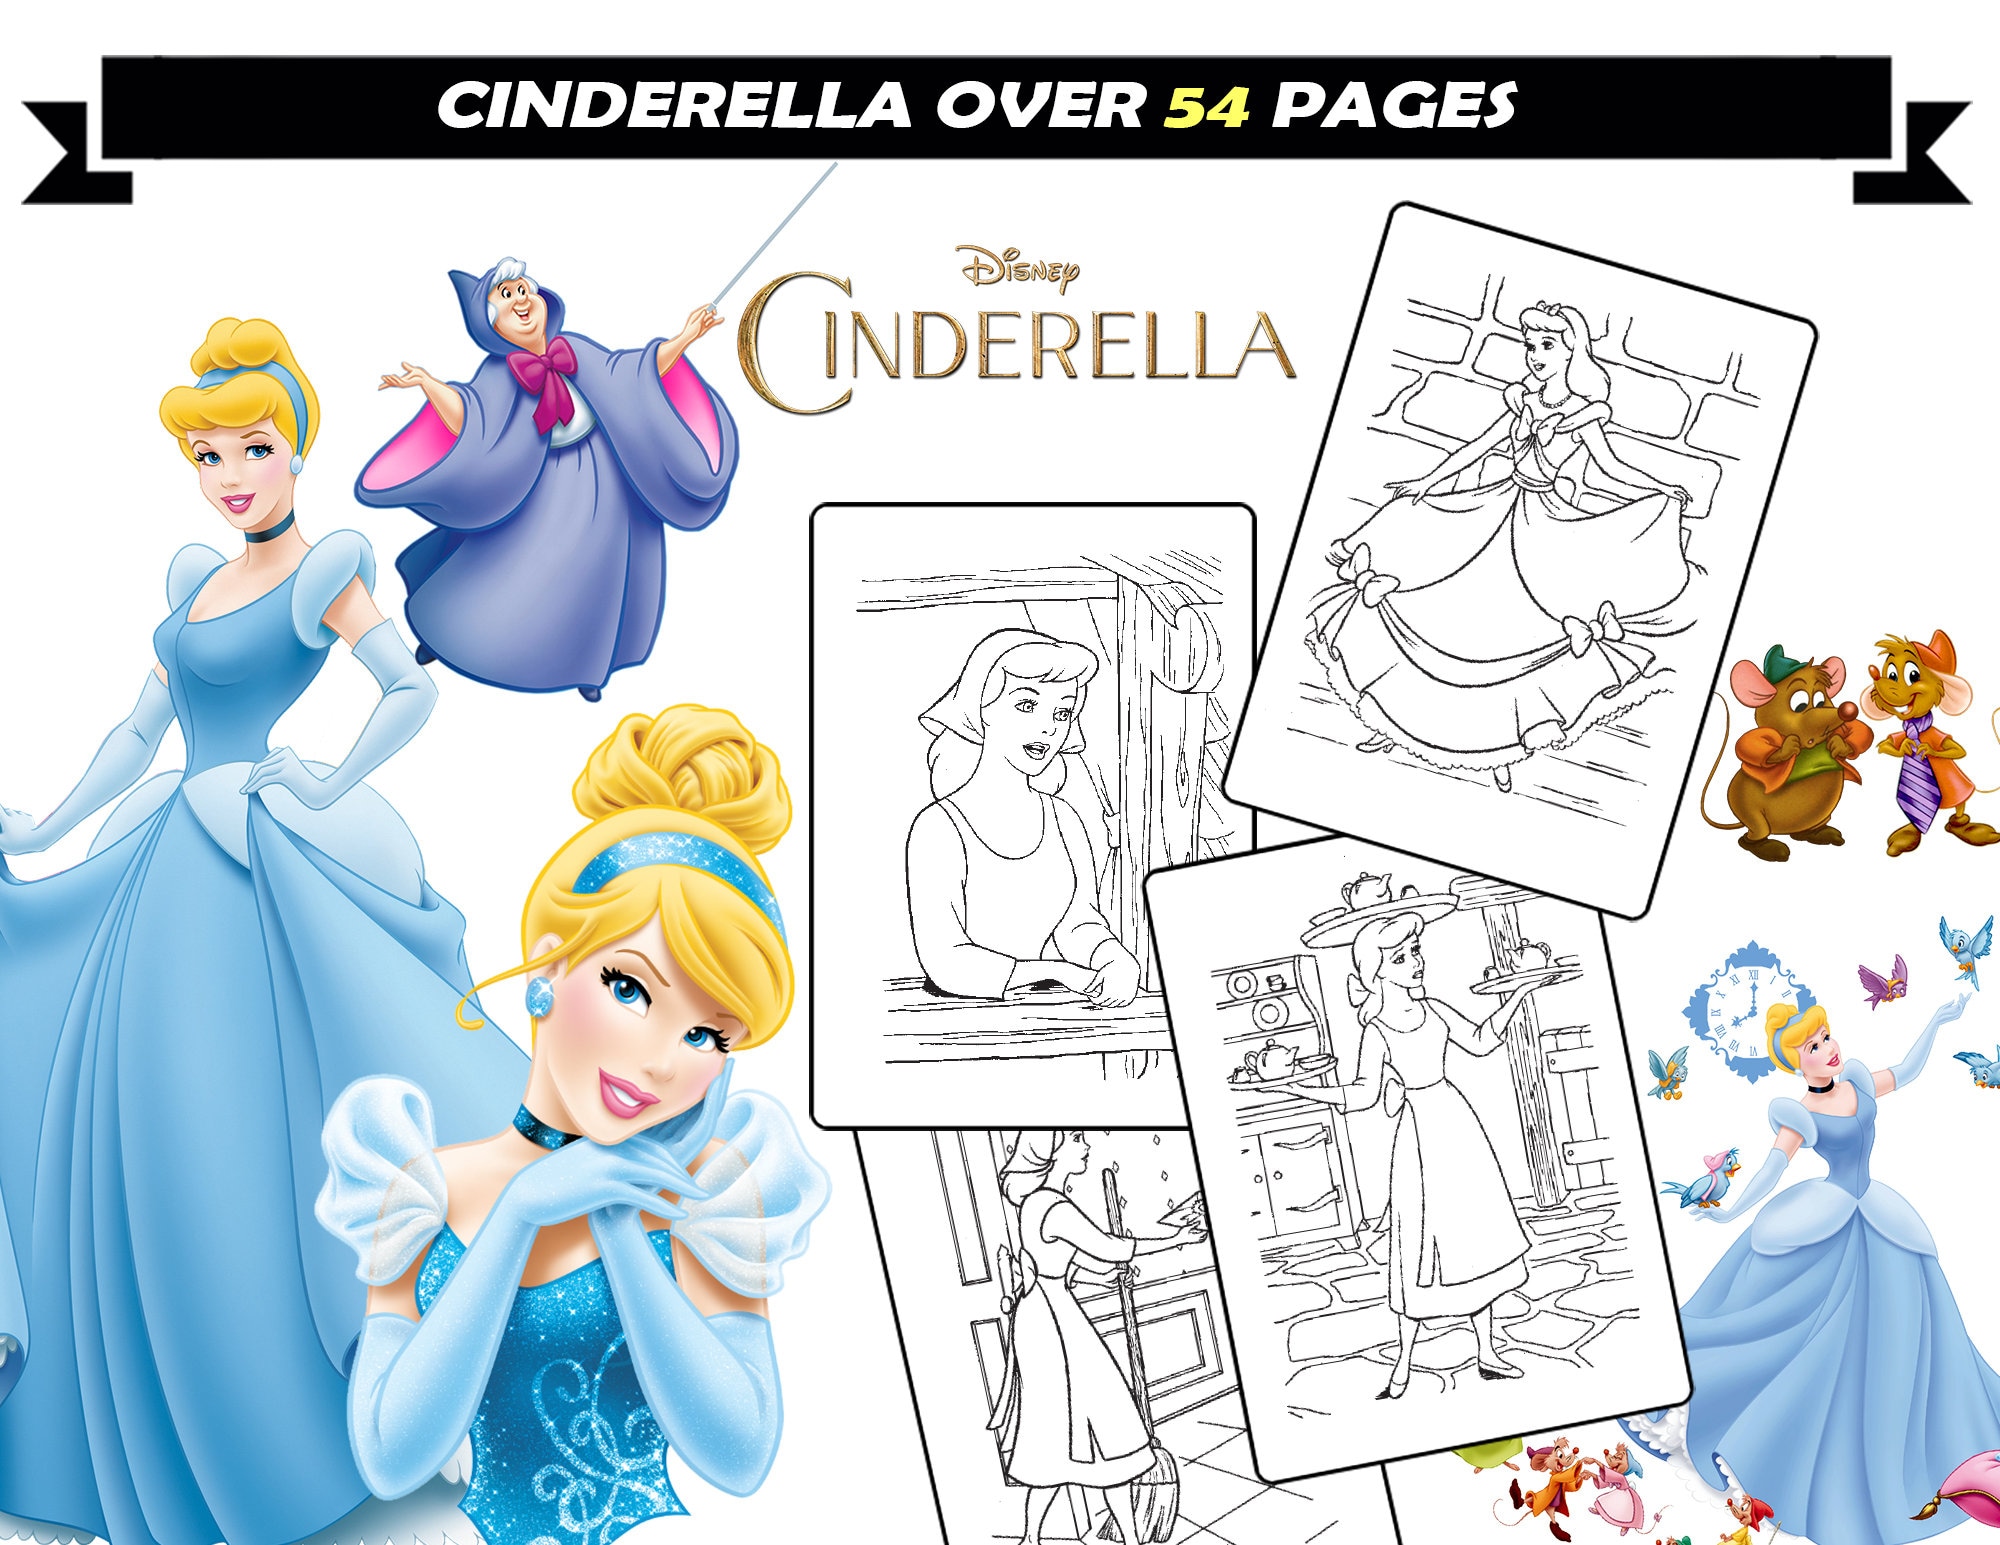 Princess Coloring Book Pages, Variety of Princess Coloring Pages for Girls,  Girl Princesses & Animal Princesses, Printable Princess Coloring 